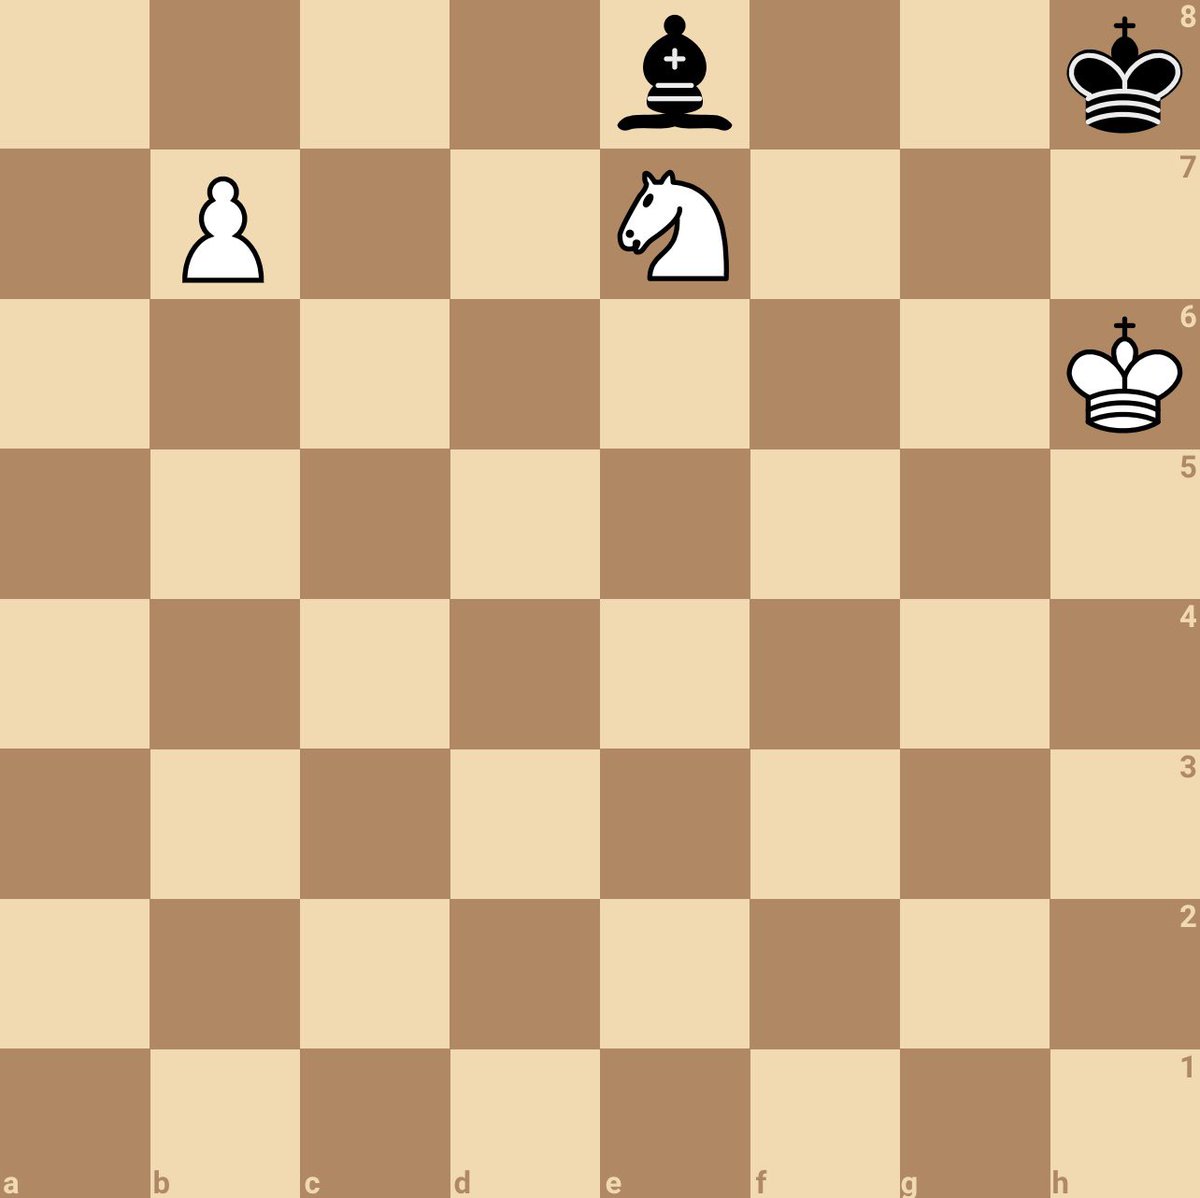 Can you solve this in one breath? 😶 White to mate on 2! ✅